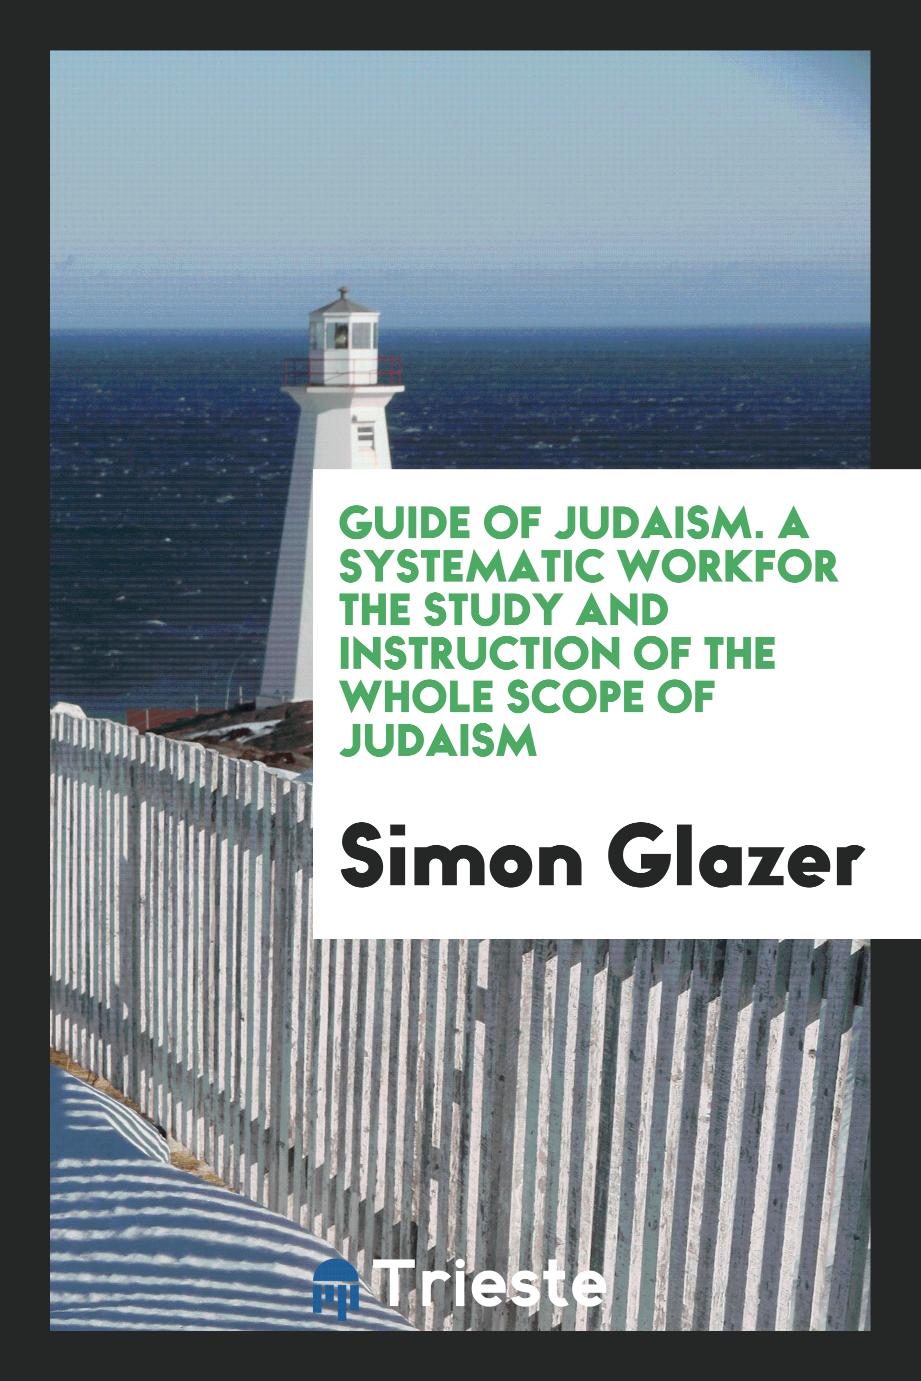 Guide of Judaism. A systematic workfor the study and instruction of the whole scope of Judaism